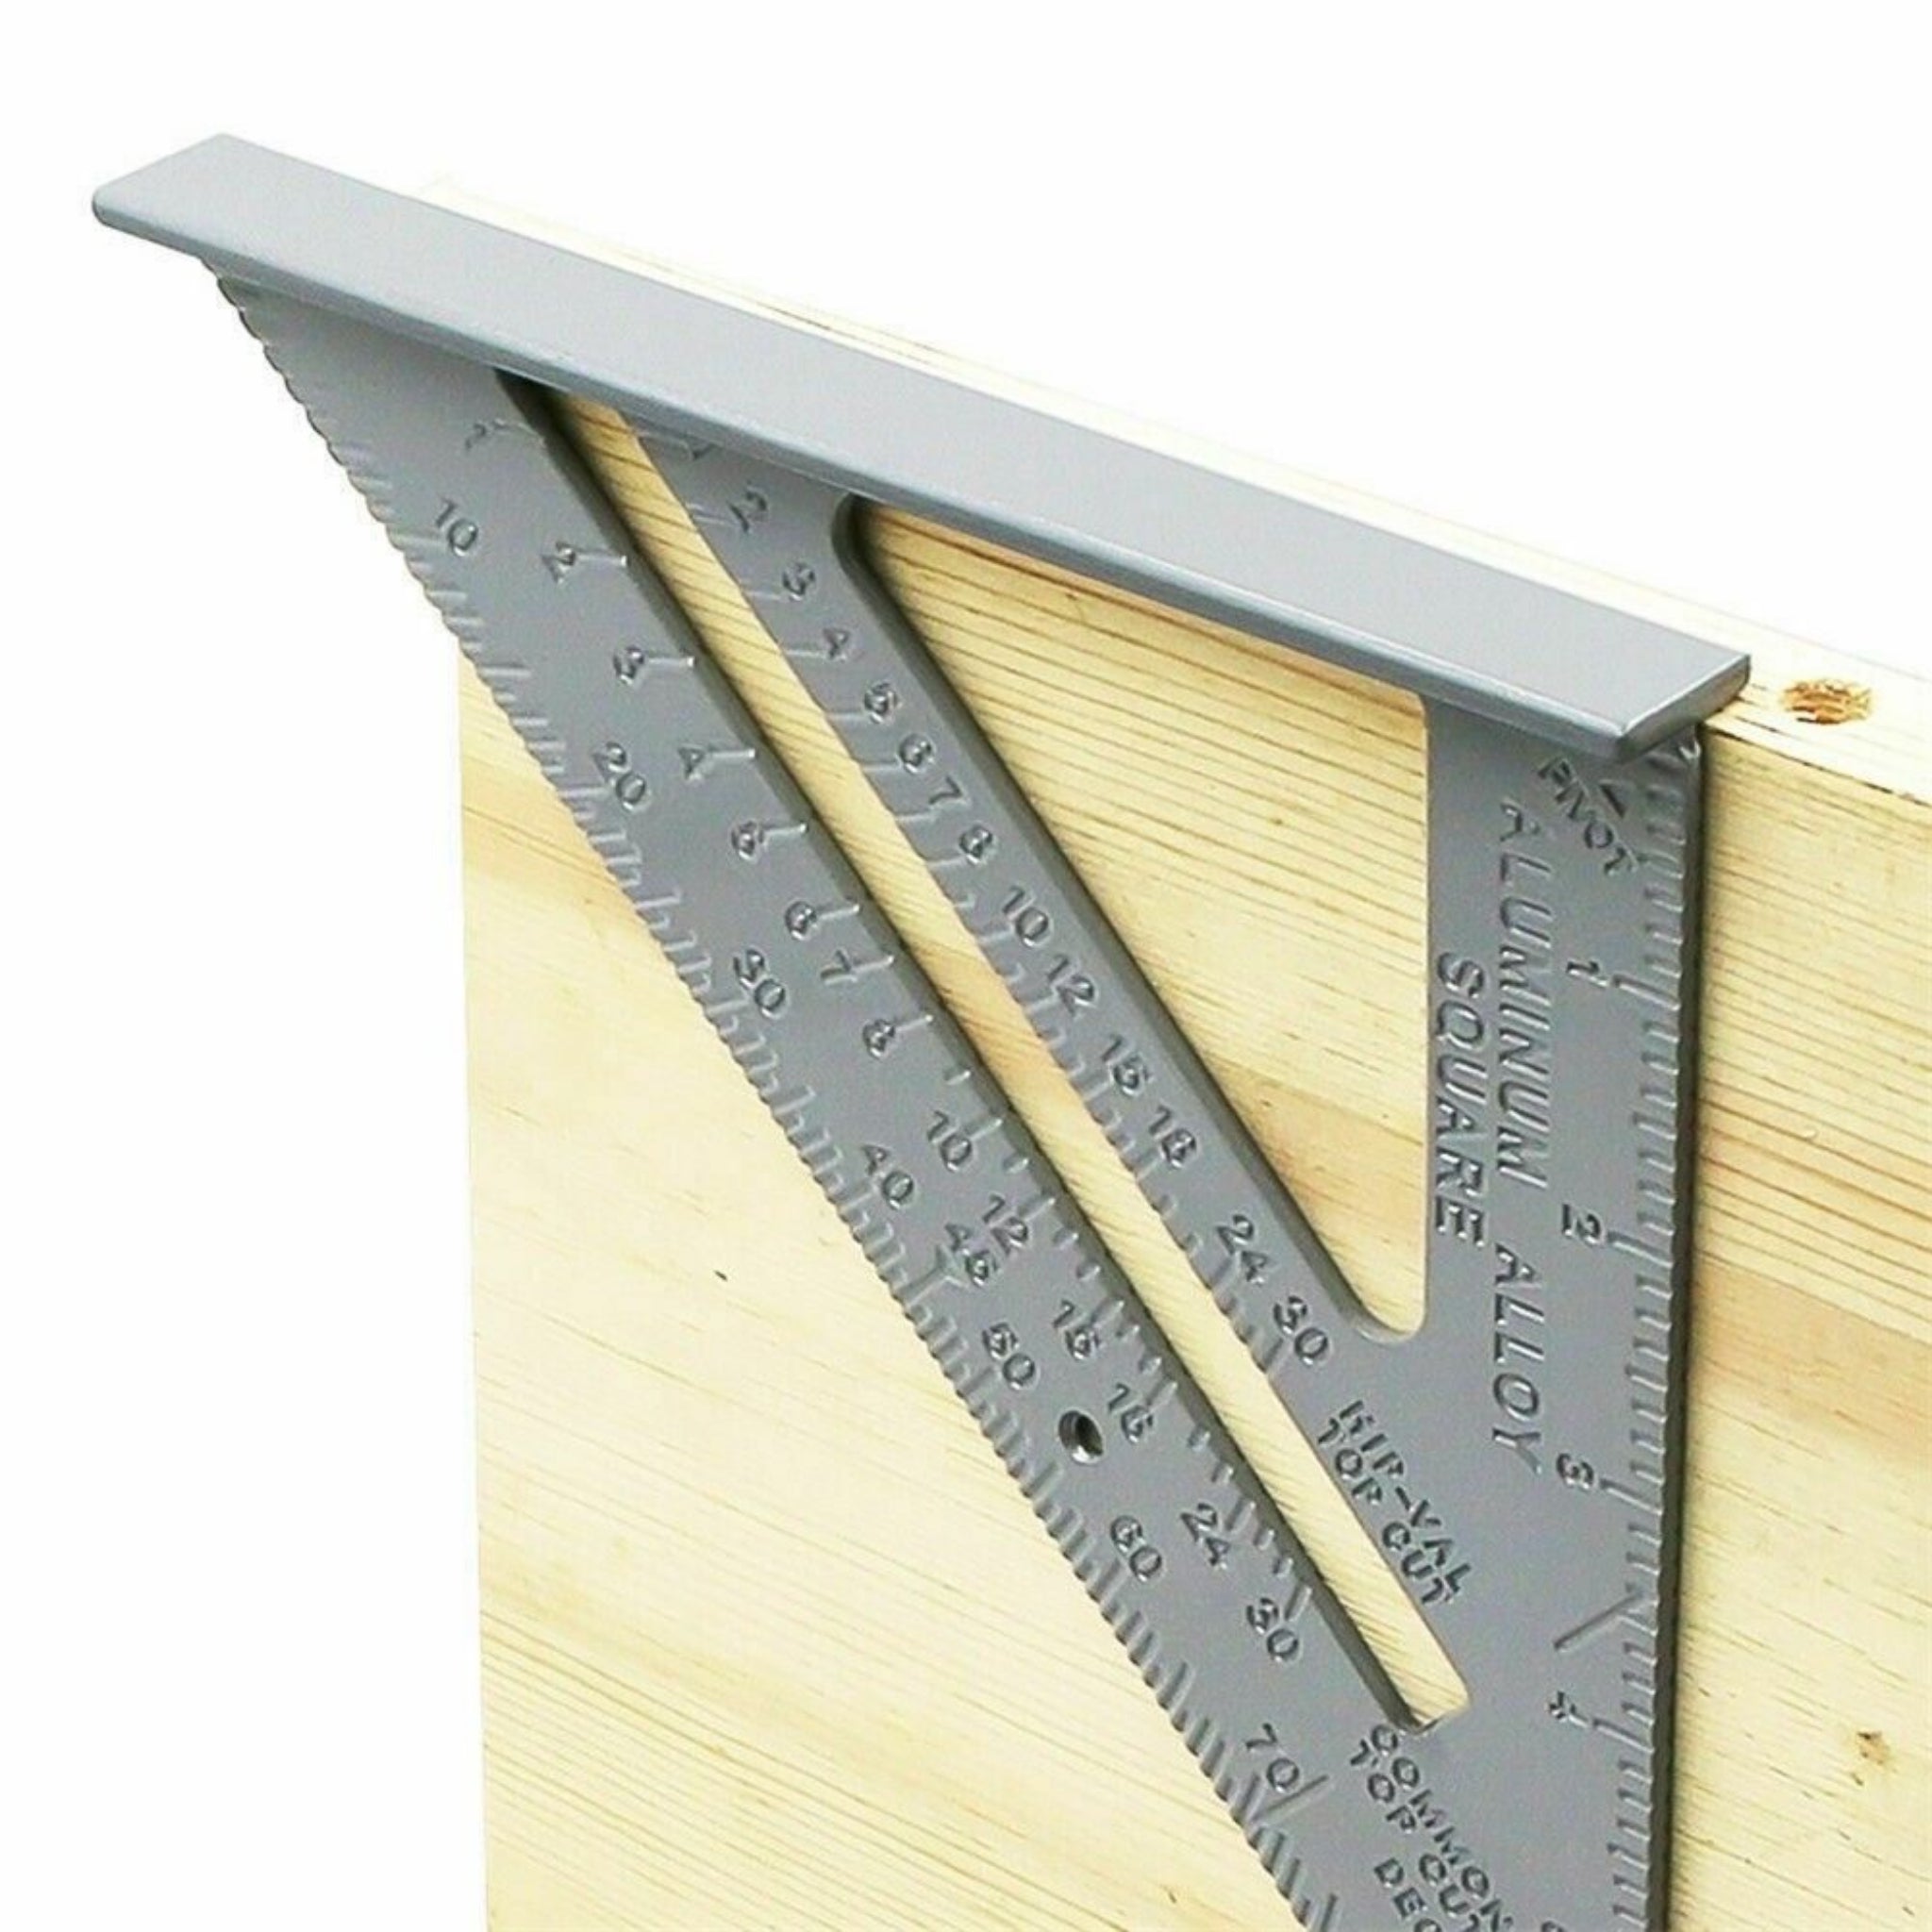 Beclen Harp 2 In 1 Metal Roofing Rafter Aluminium Roofer Square Tool Size 12x8